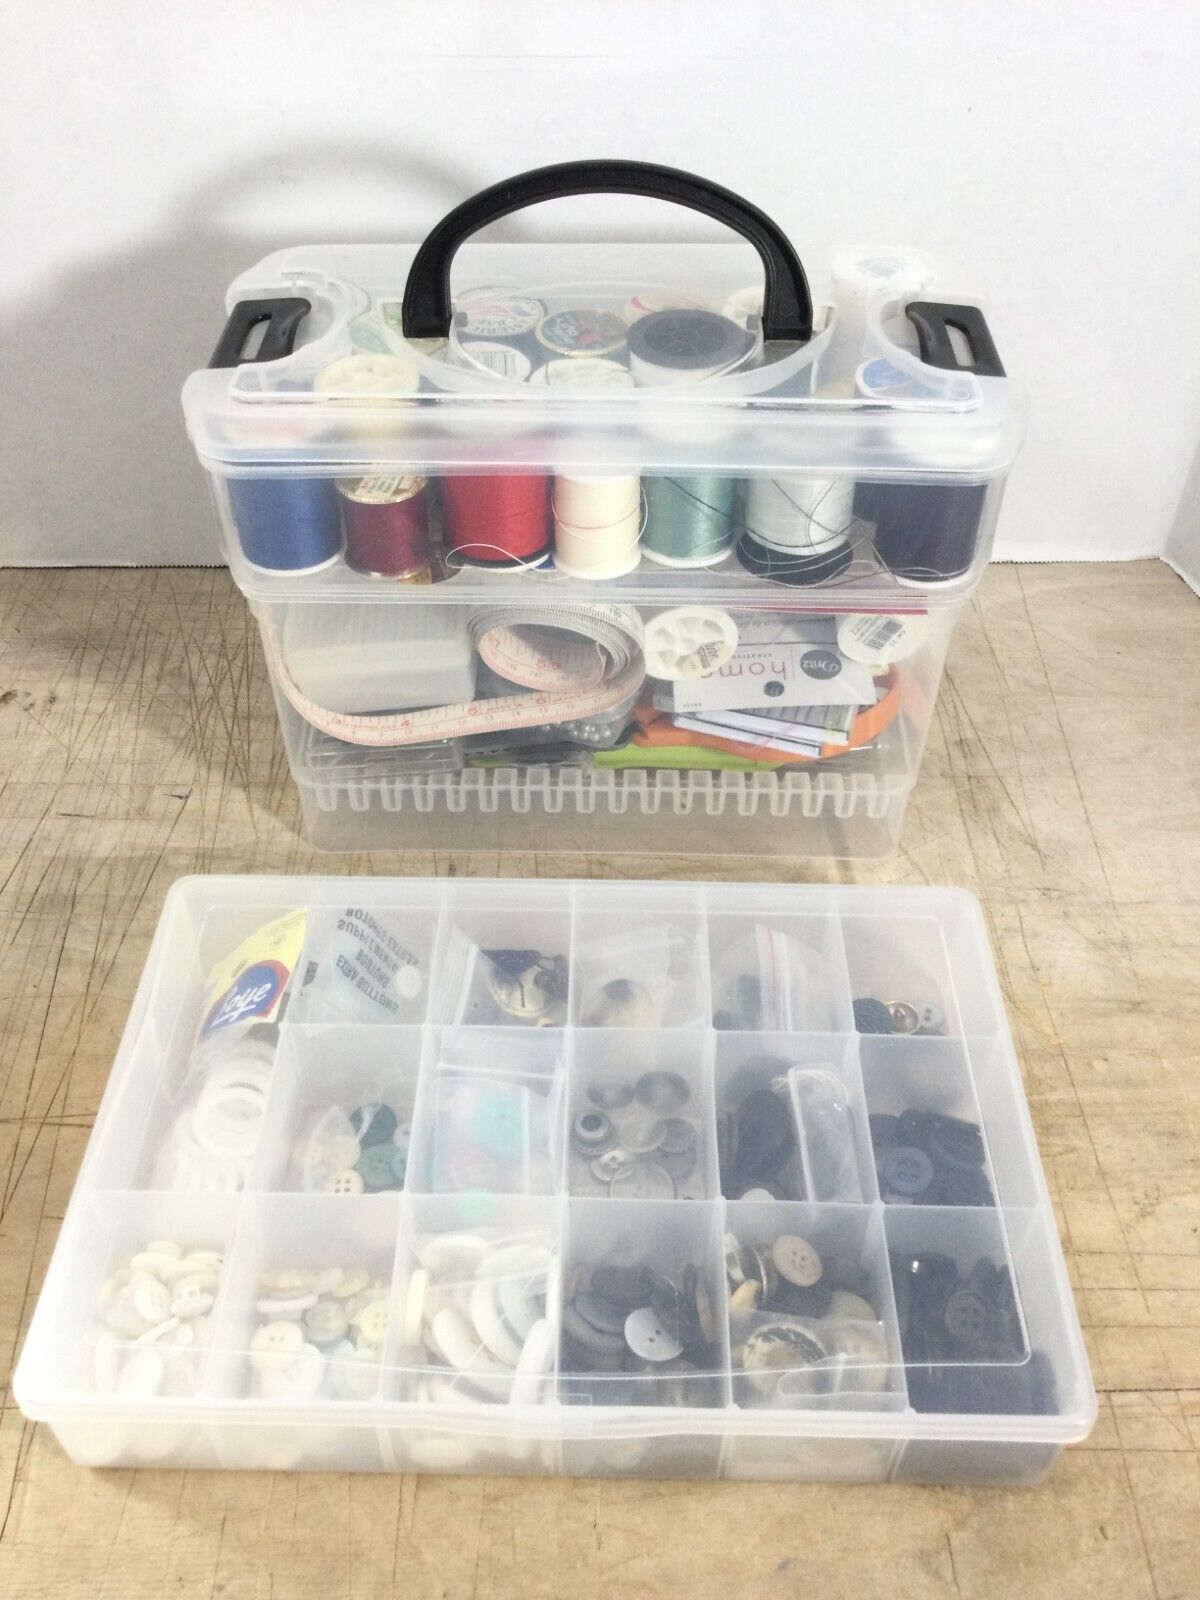 Large Vintage Lot Sewing Thread, Notions, Buttons, Needles, Shears, and Case